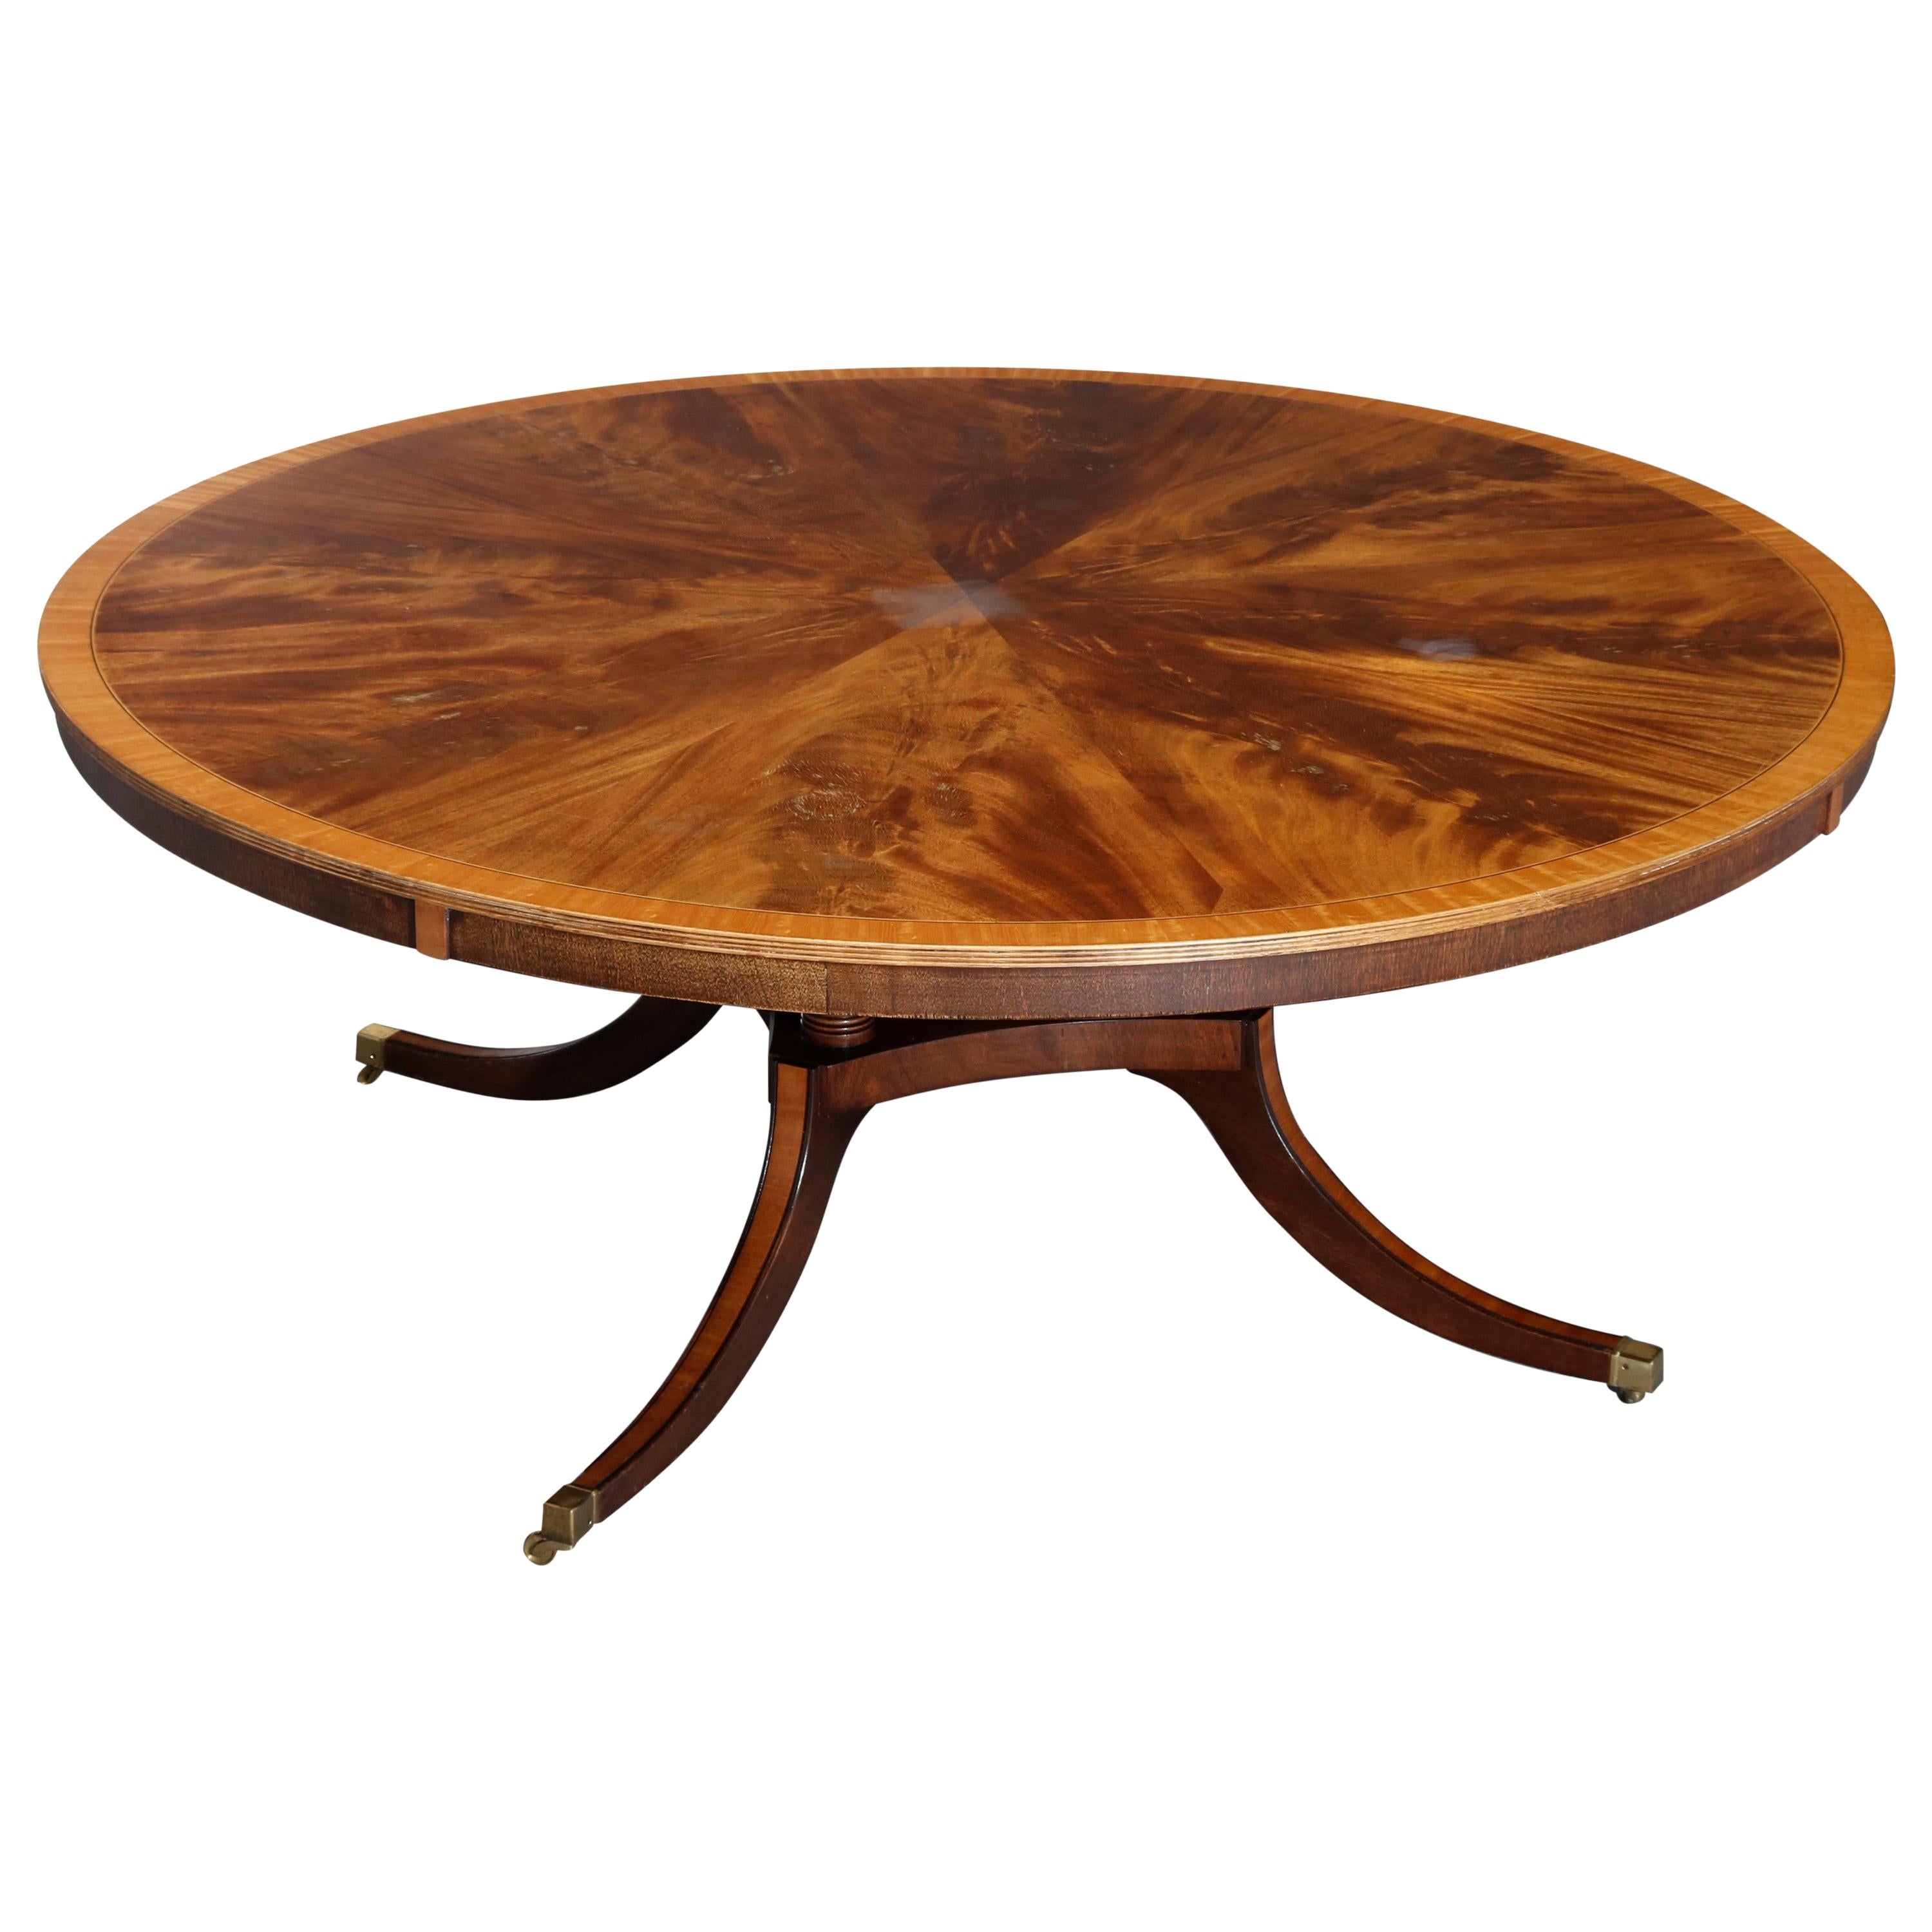 Oversized Federal Flame Mahogany and Satinwood Sunburst Dining Table by Rist